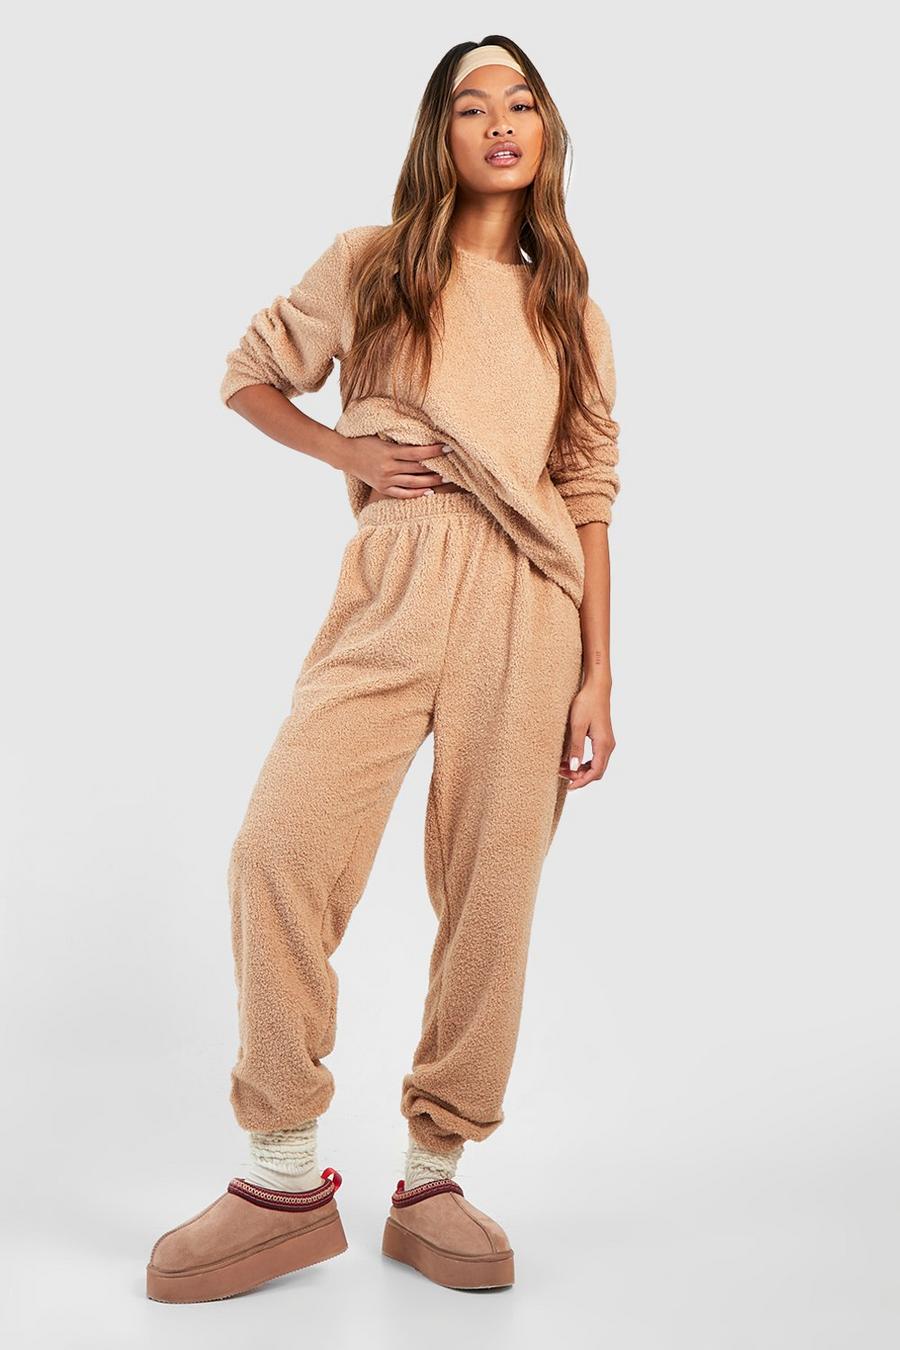 Camel Hers Matching Teddy Long Sleeve Loungewear Track Pants Set image number 1